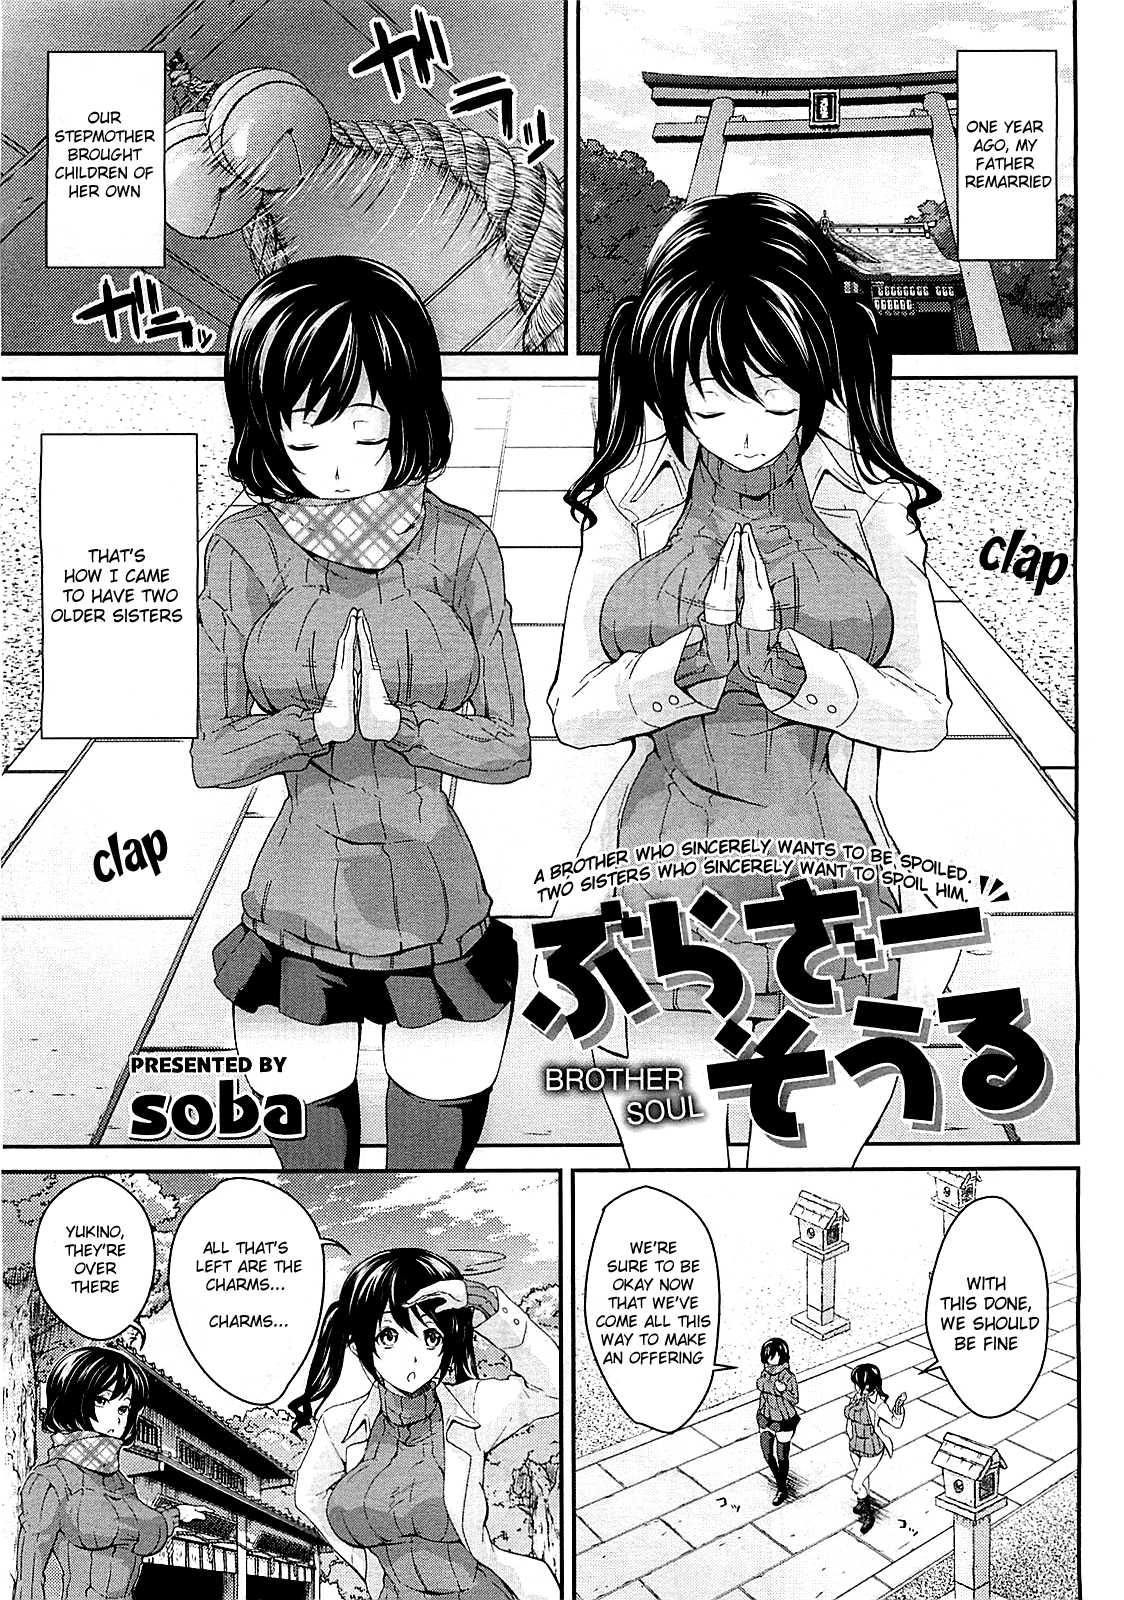 [soba] Brother Soul (COMIC Megastore 2012-06) [English] The Lusty Lady Project 